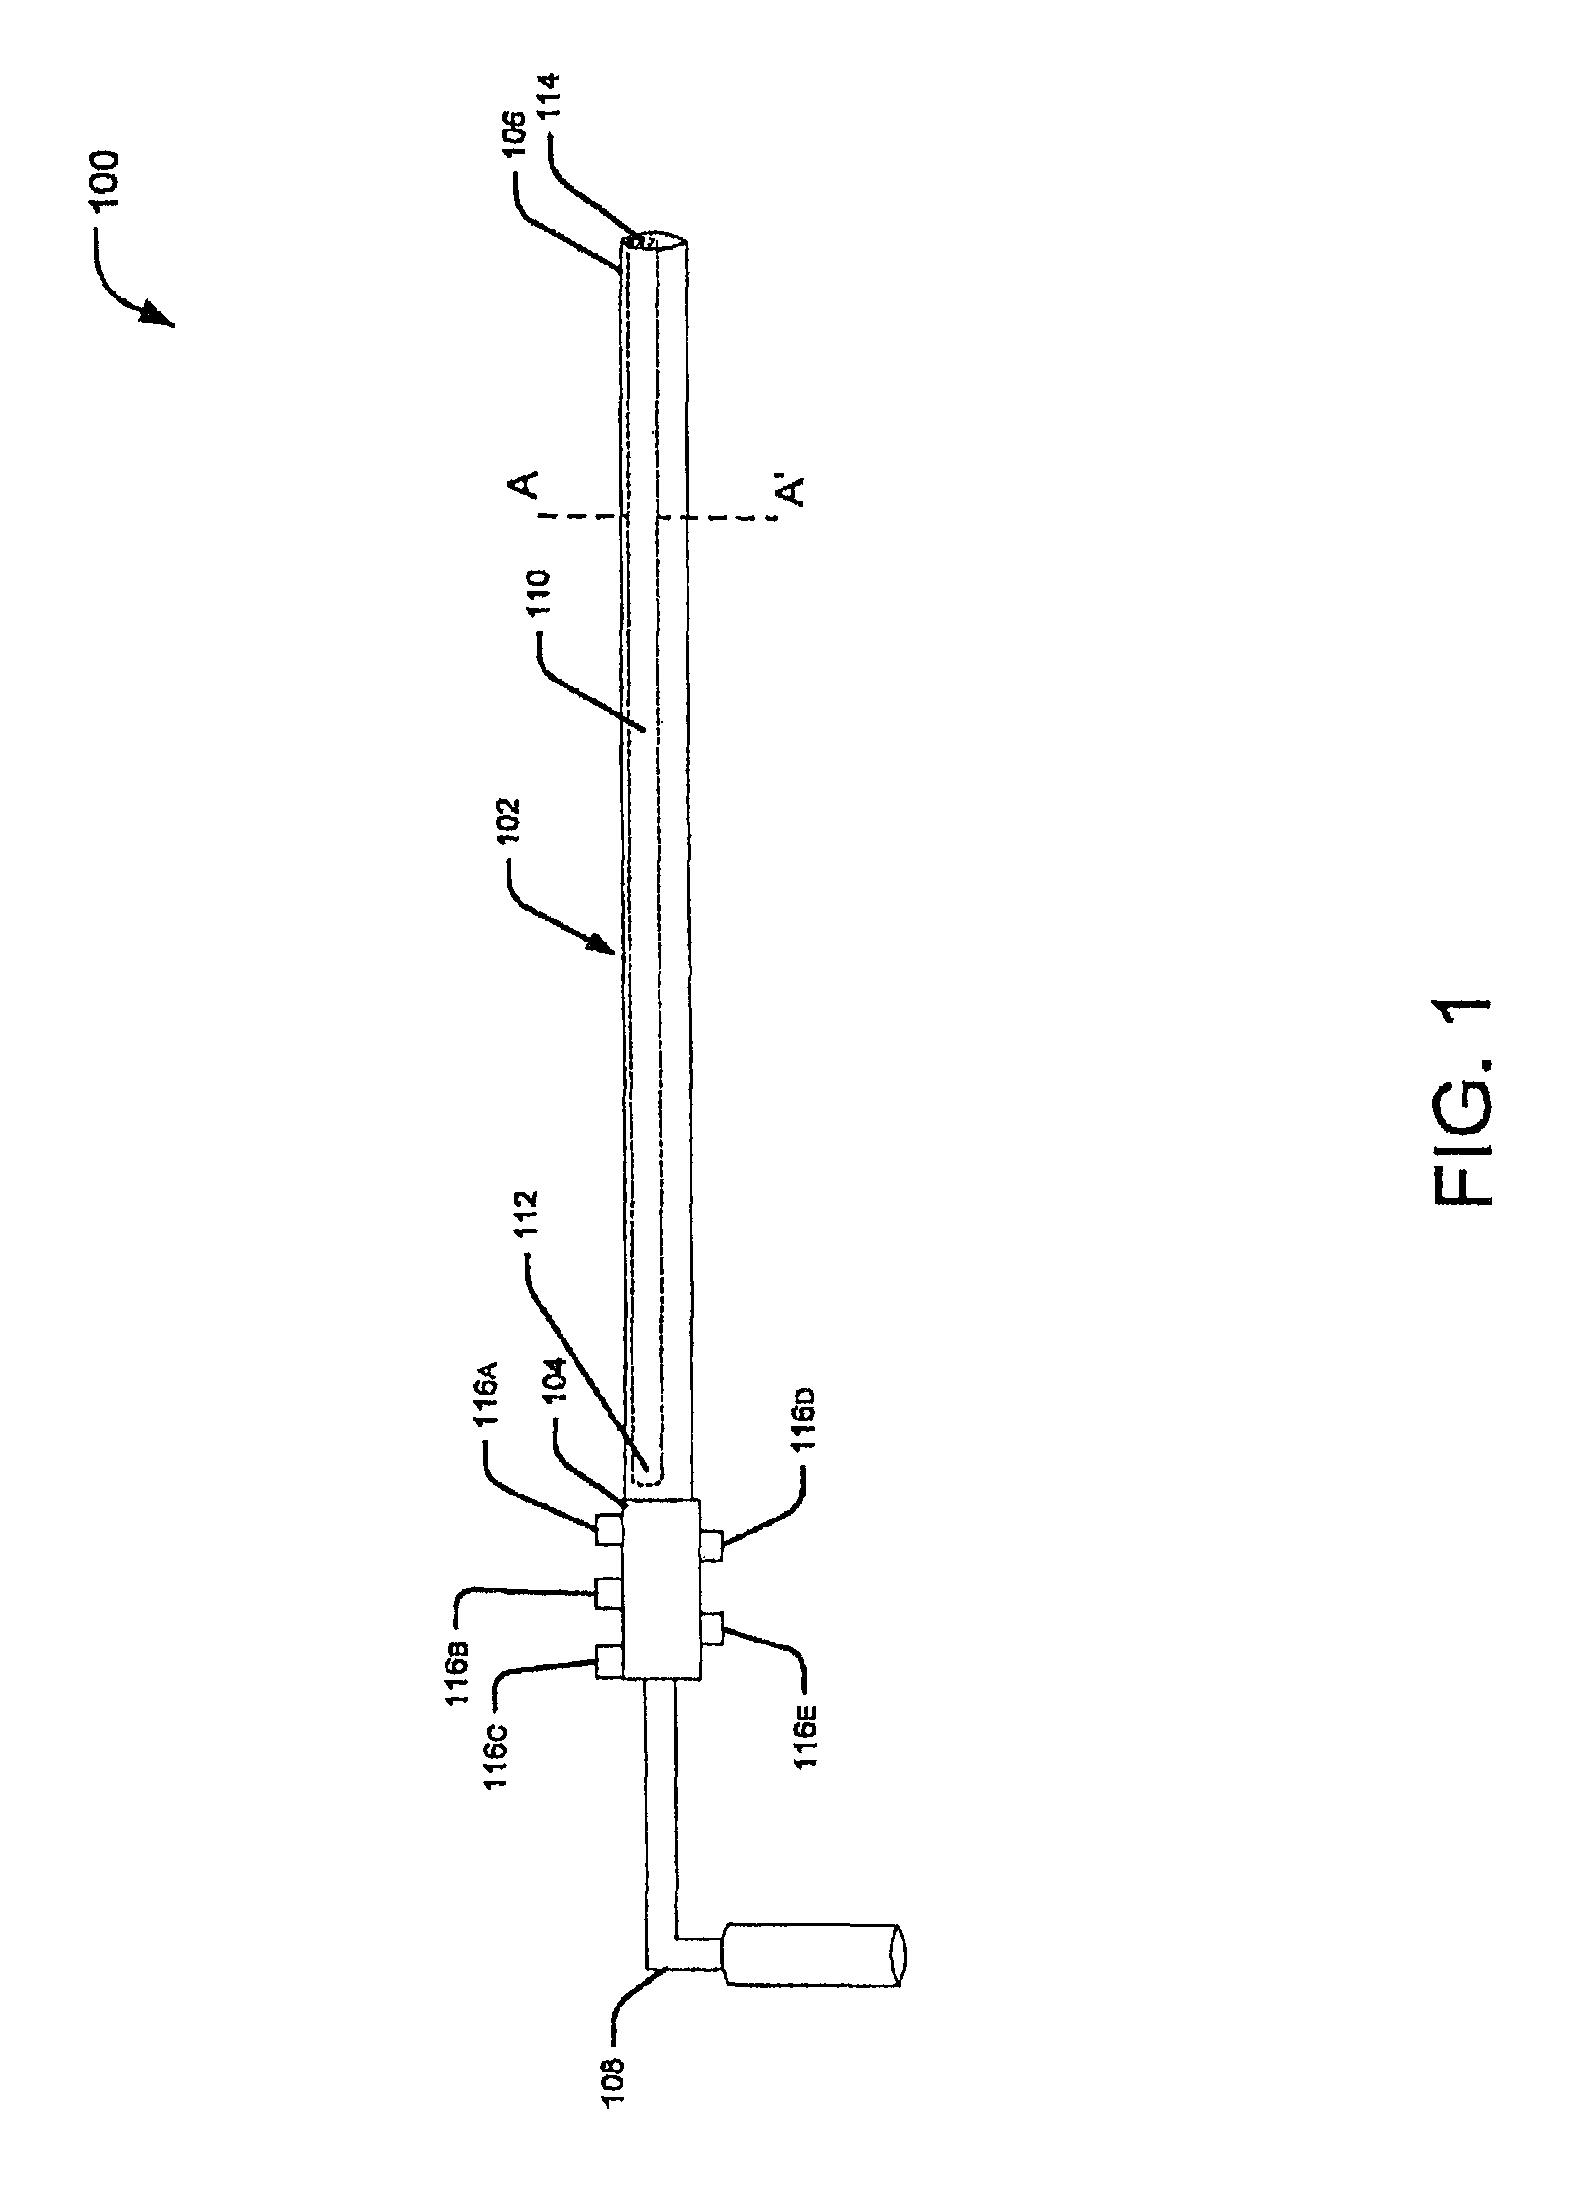 Tissue and stone removal device and related methods of use